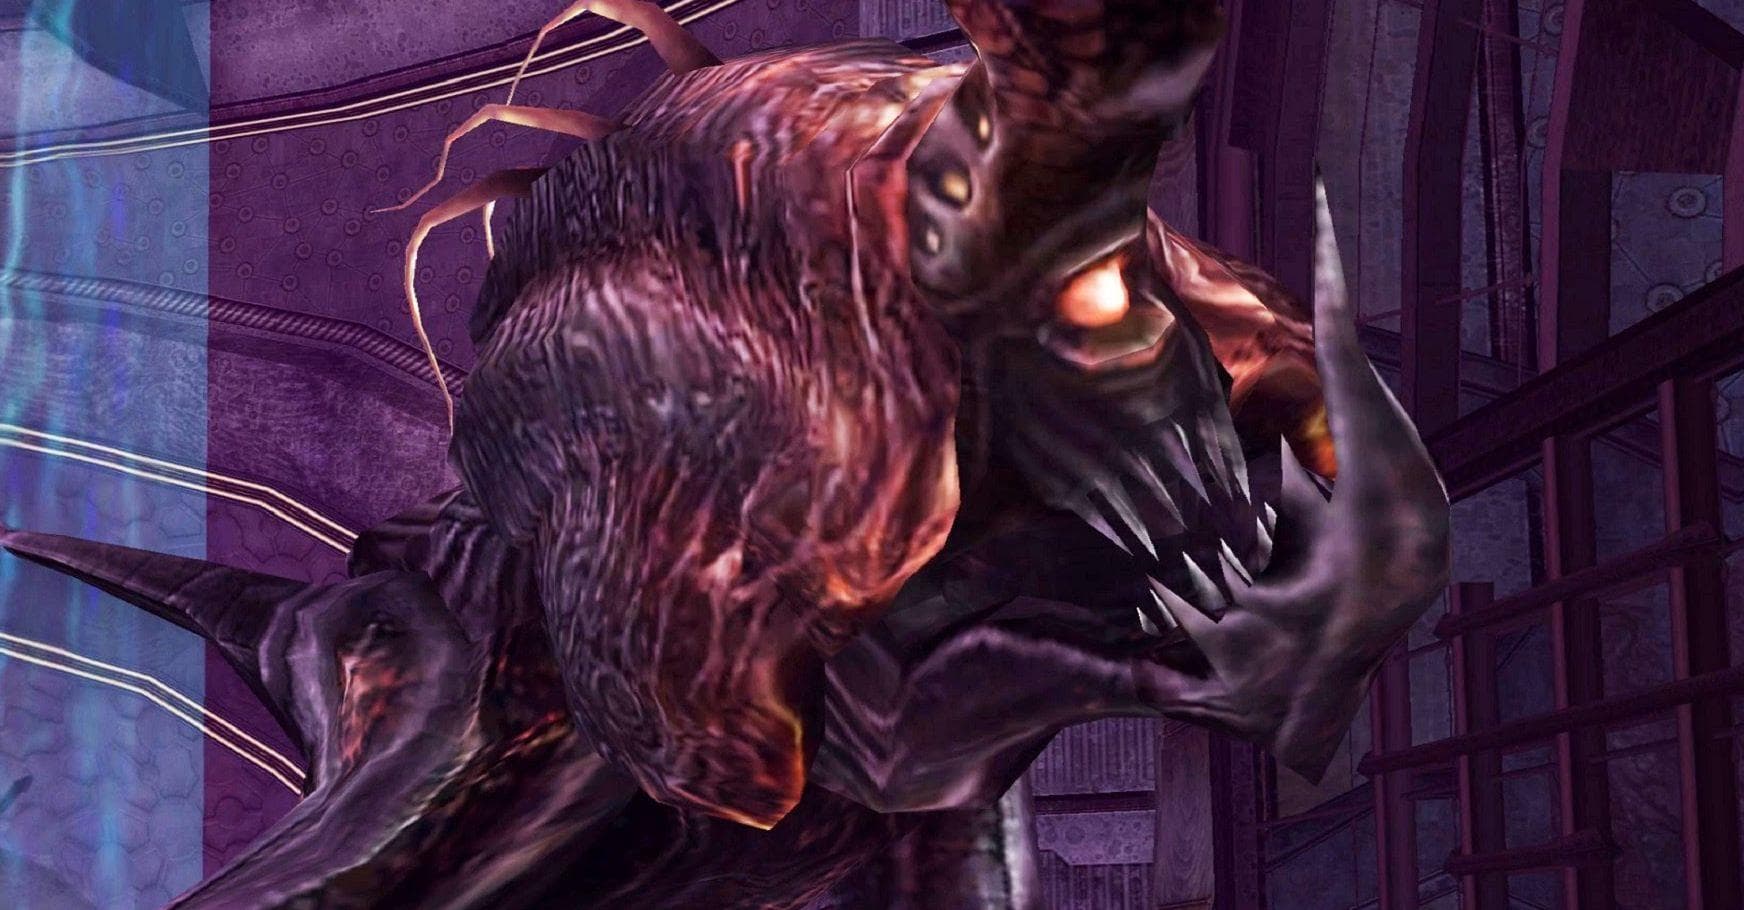 by Mutton lokalisere List of All Metroid Prime 2 Bosses Ranked Best to Worst